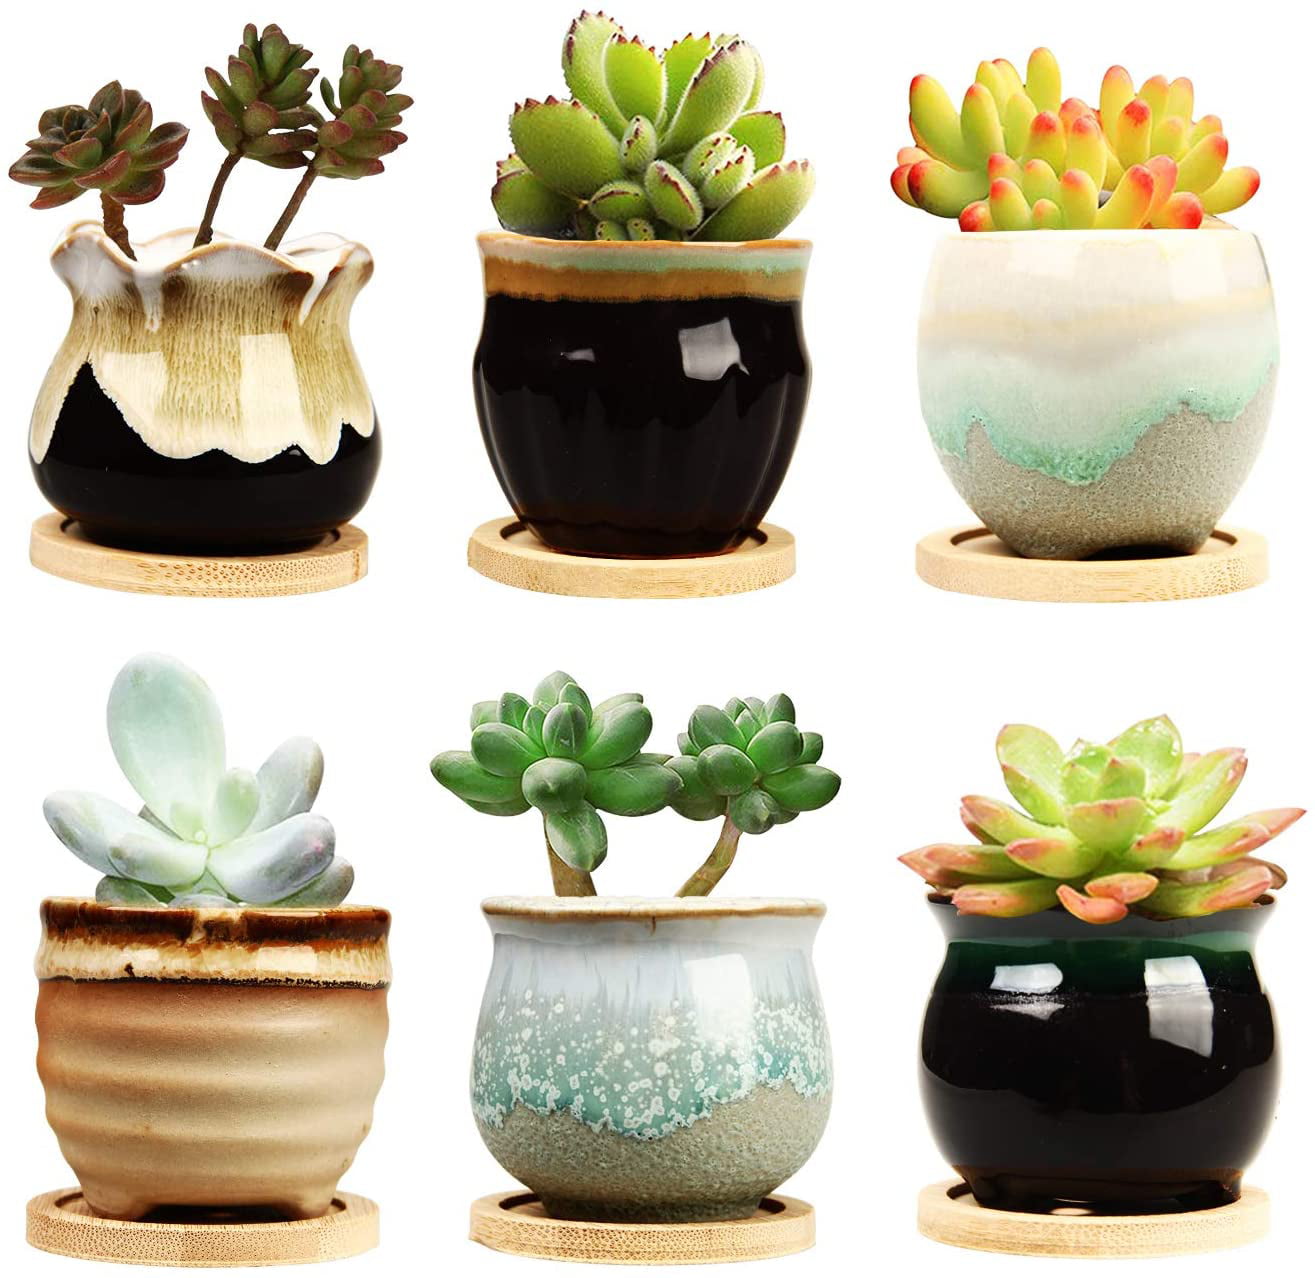 T4U Ceramic Succulent Pots 2.5 Inch Round Set of 6 with Trays Marbling Porcelain Herbs Cactus Container for Home and Office Decor Small Succulent Planter with Drainage 